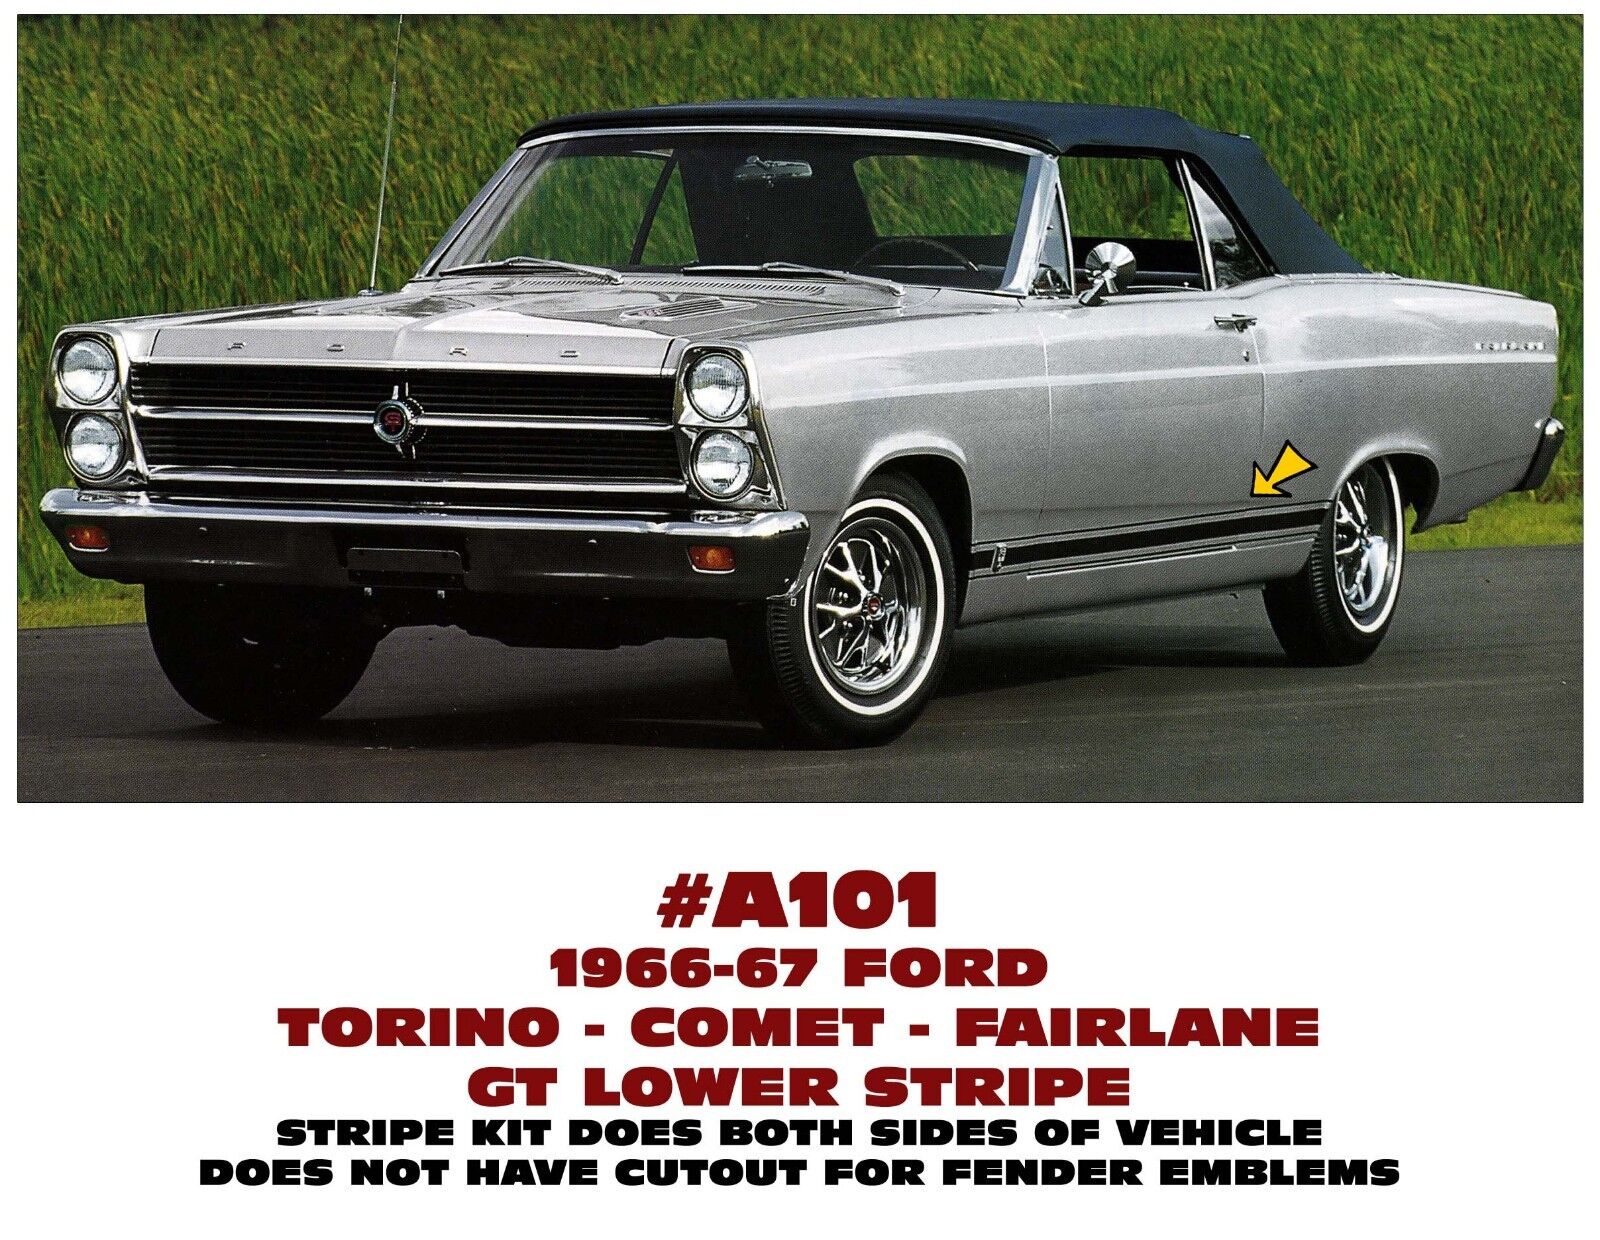 GE-A101 1966 1967 FORD TORINO - COMET - FAIRLANE - GT LOWER SIDE STRIPE DECAL